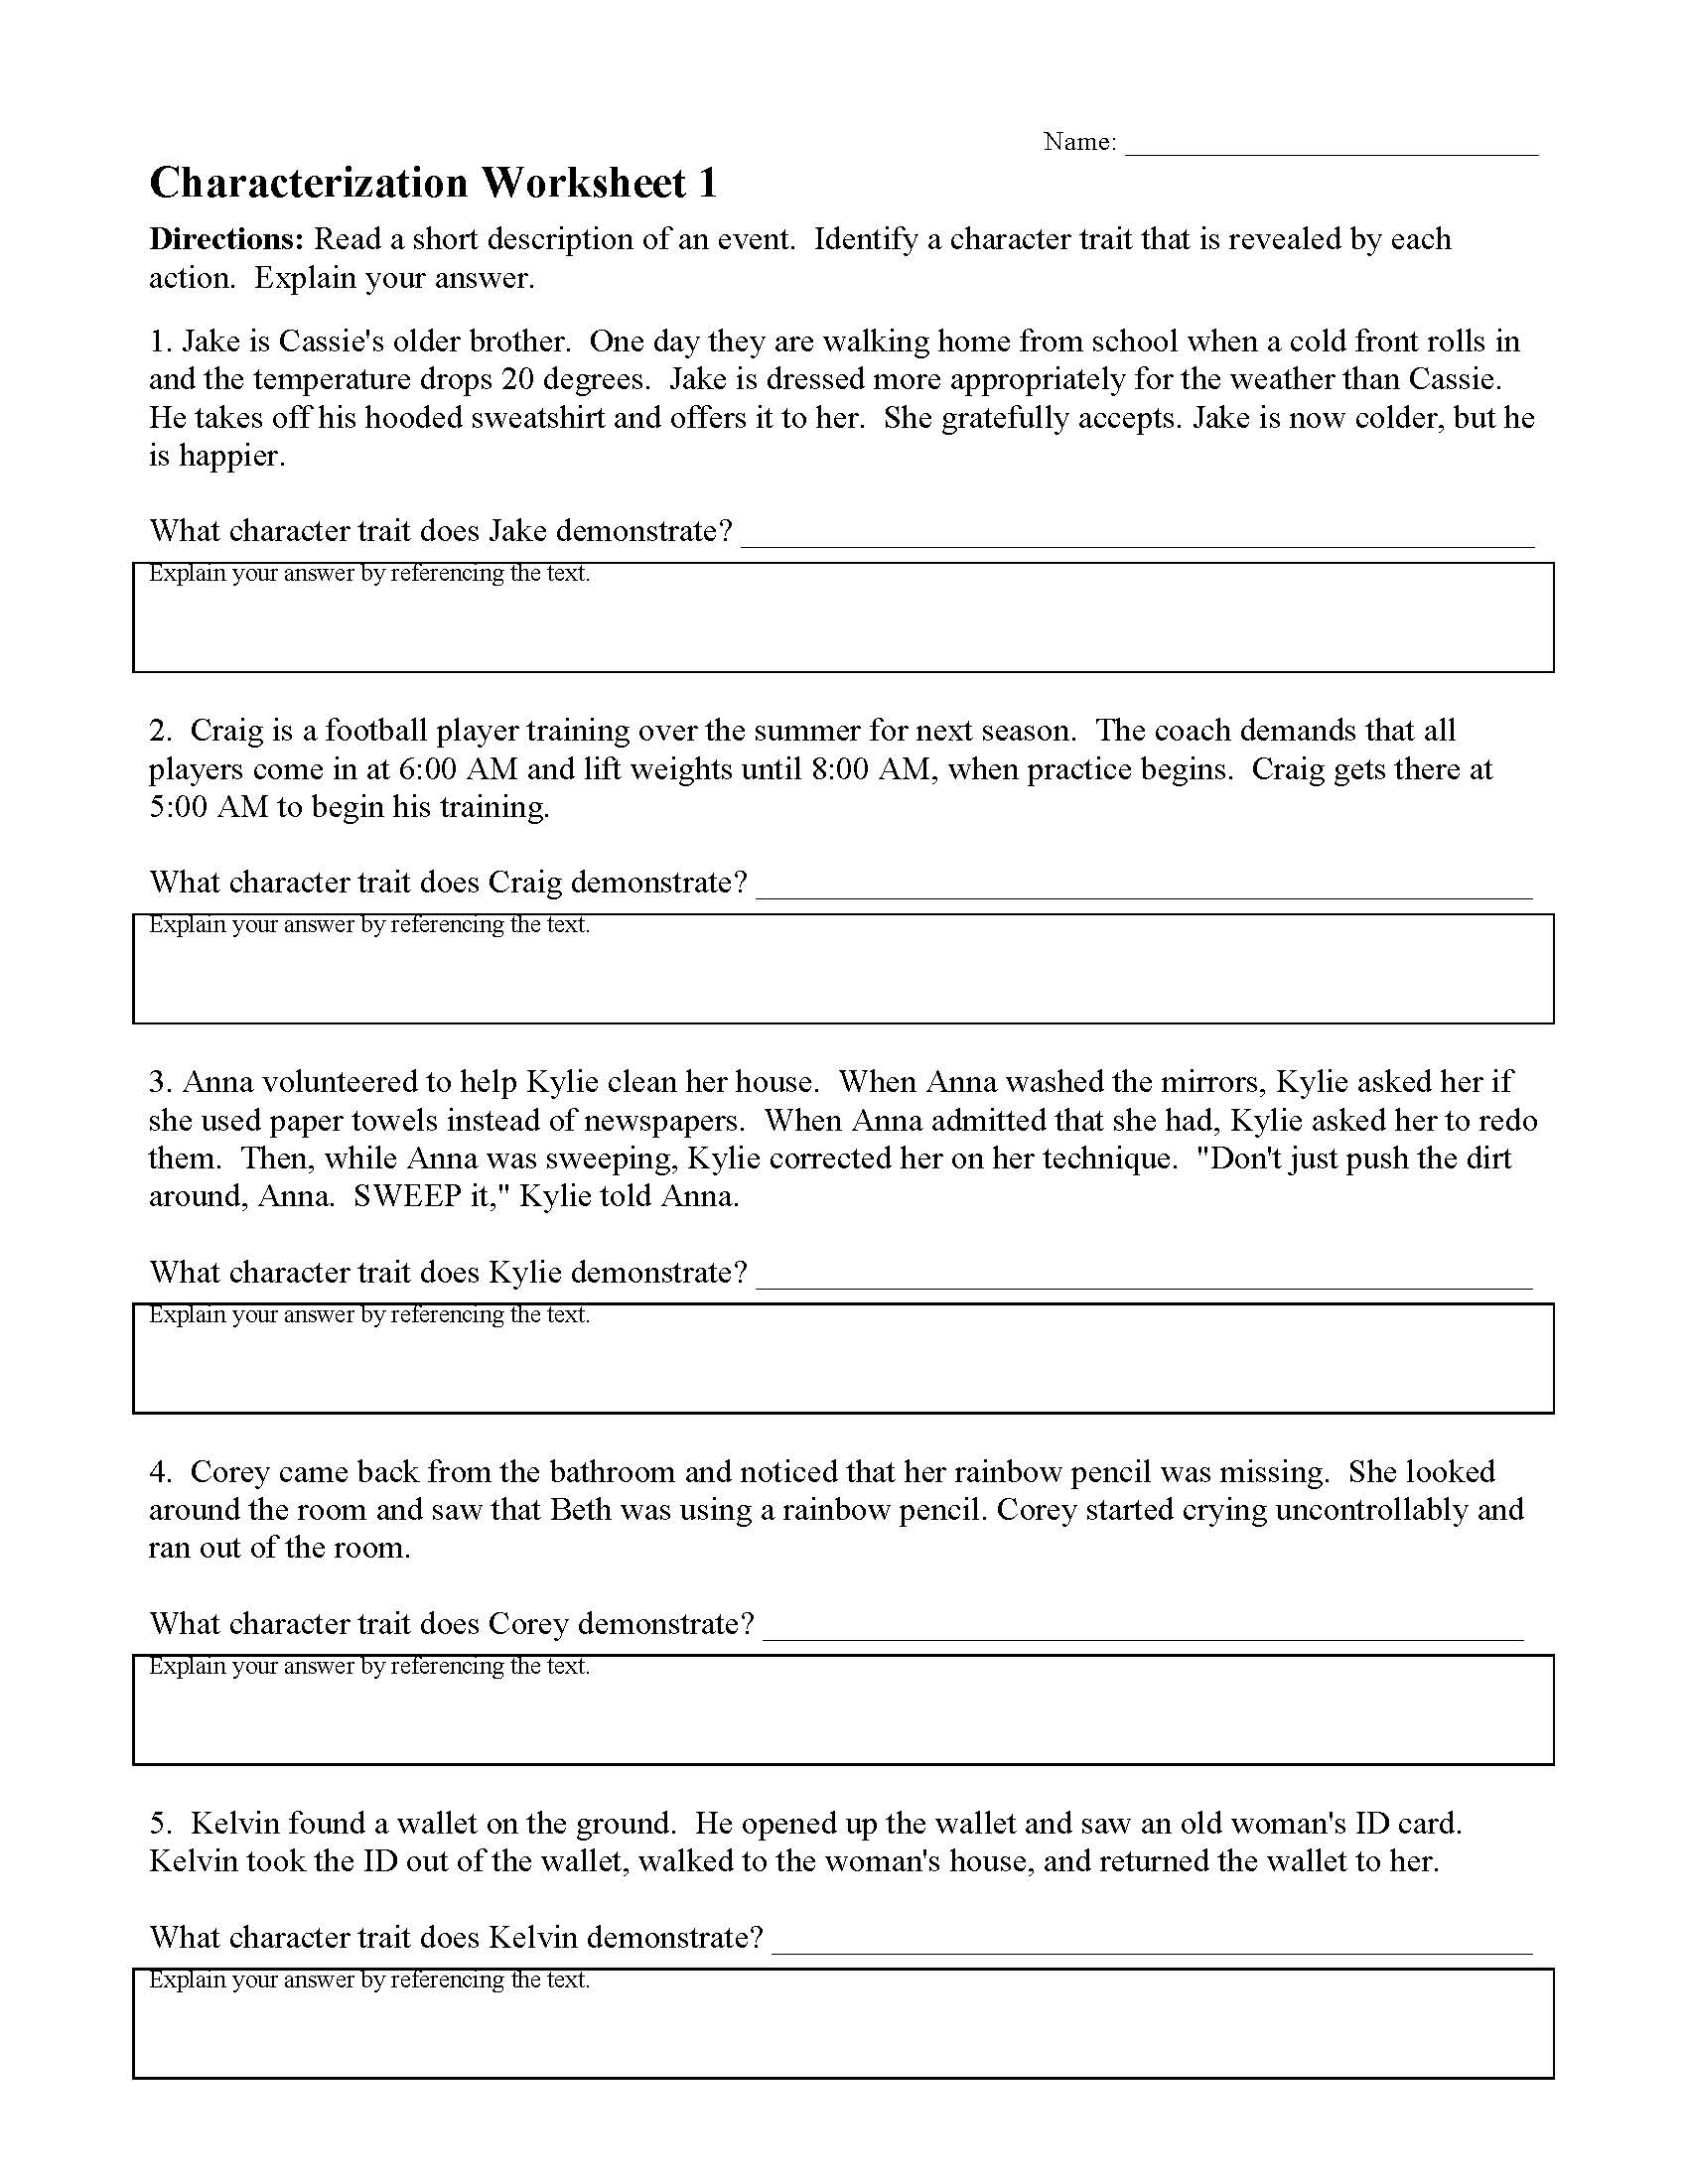 This is a preview image of Characterization Worksheet 1. Click on it to enlarge it or view the source file.